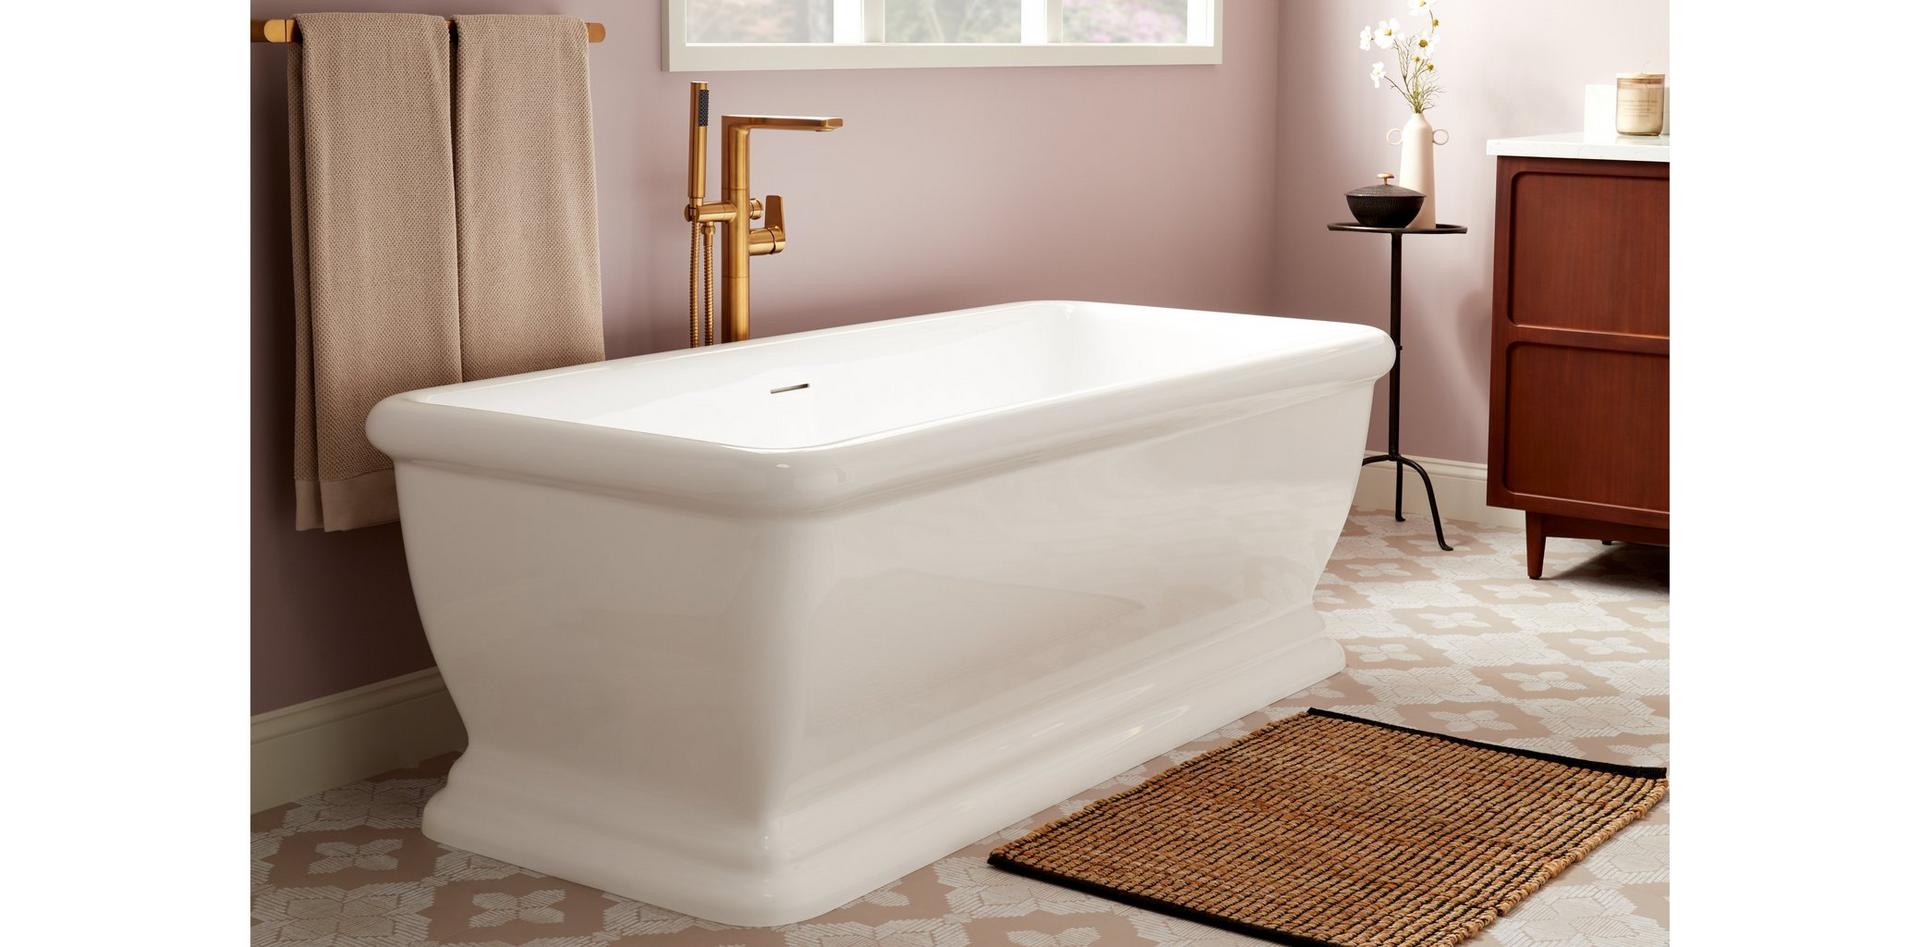 Remove scratches from acrylic tub - 69" Serafini Freestanding Acrylic Tub